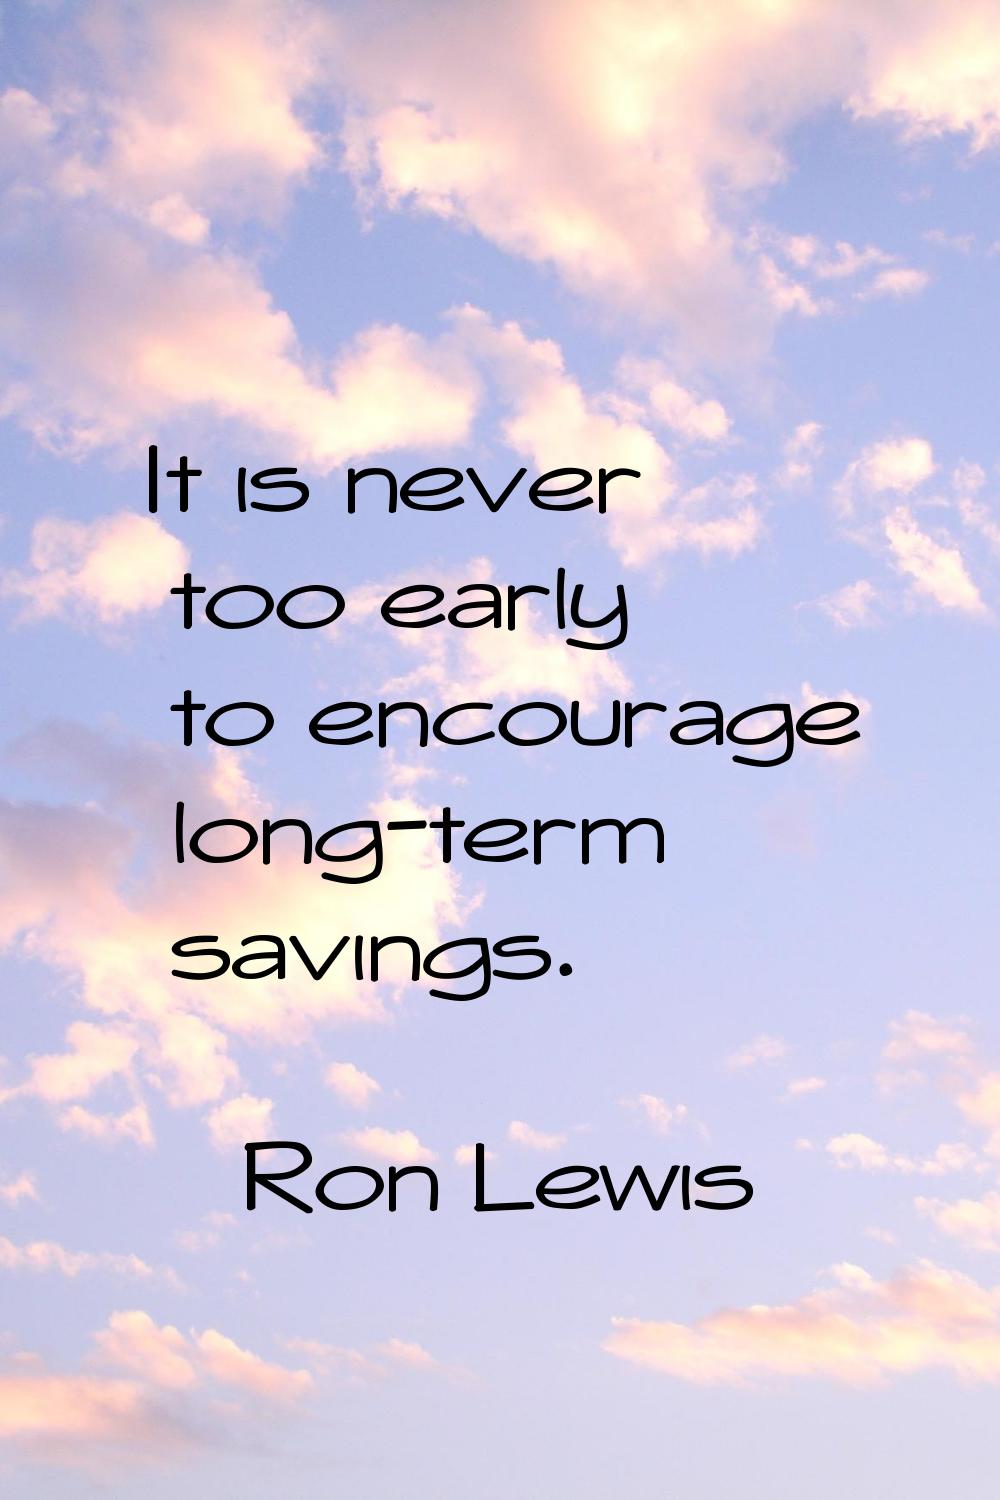 It is never too early to encourage long-term savings.